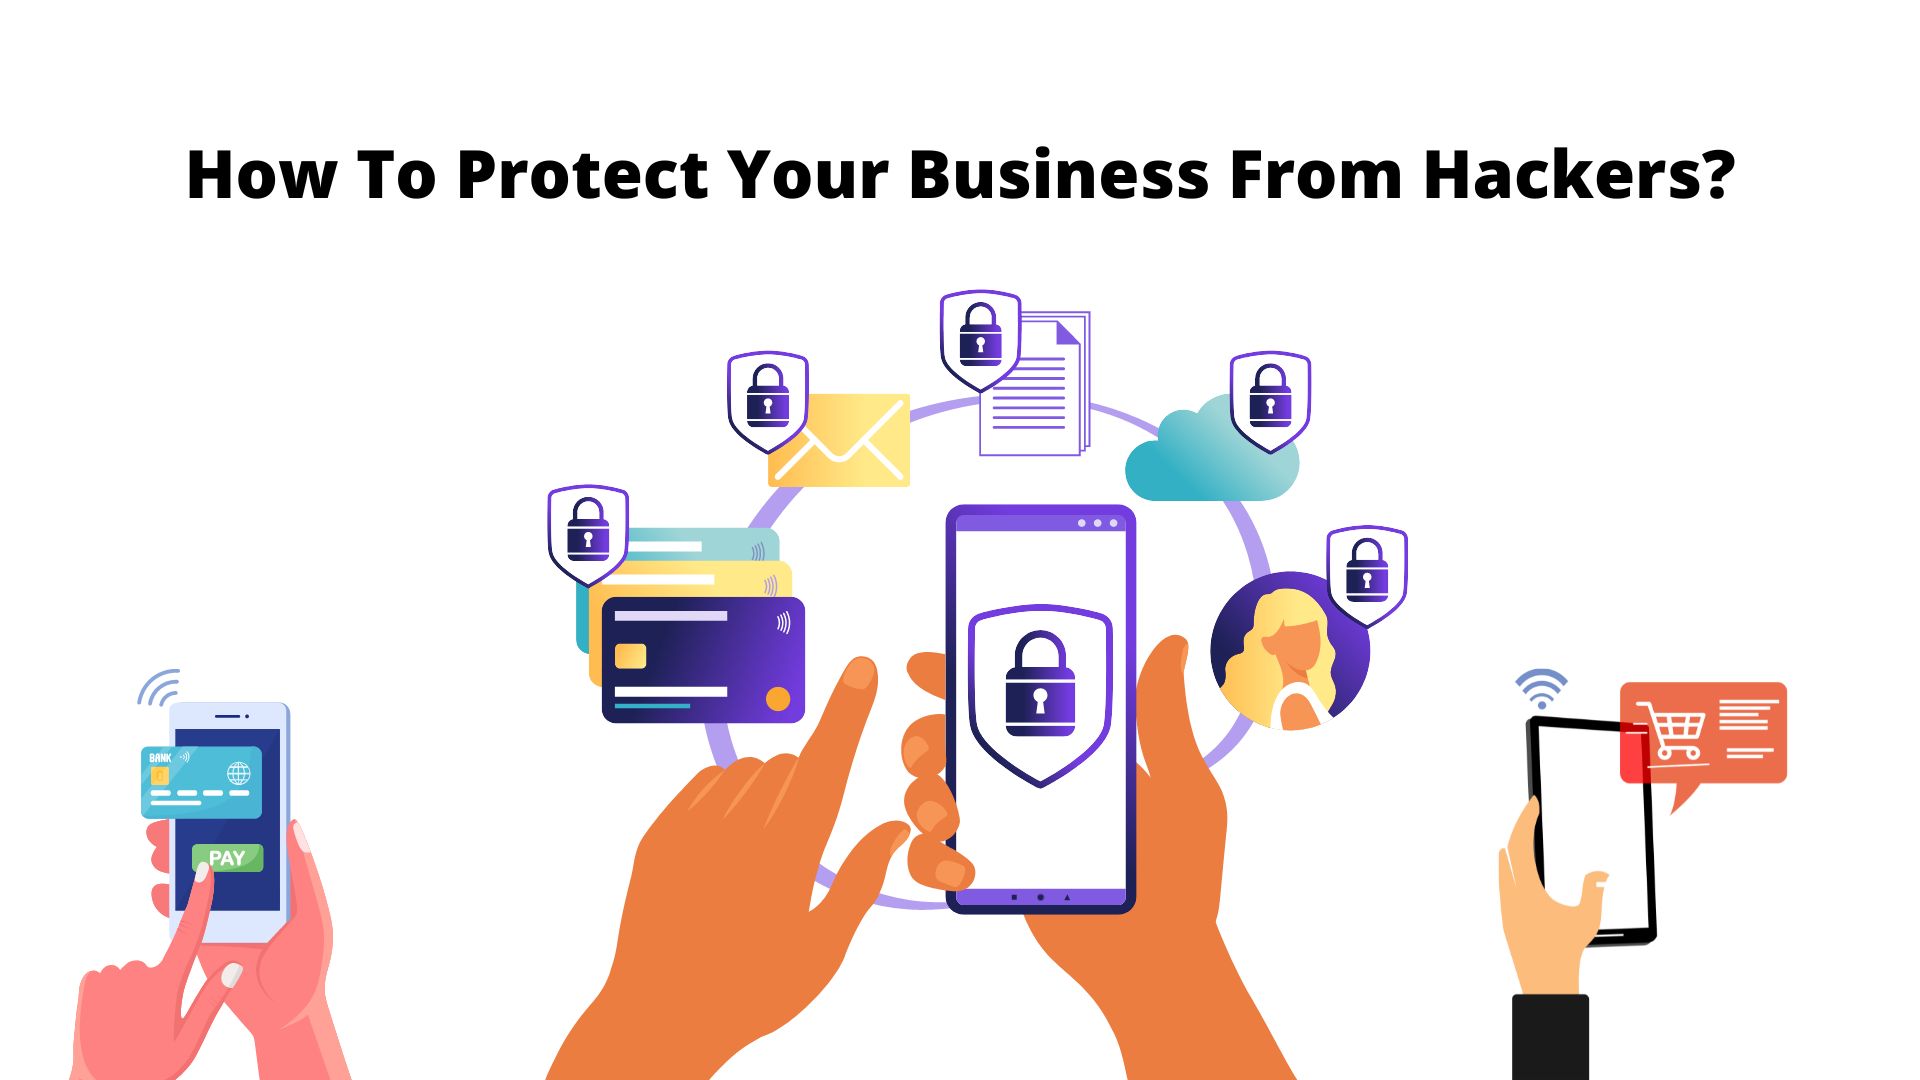 Endpoint Security: How To Protect Your Business From Hackers